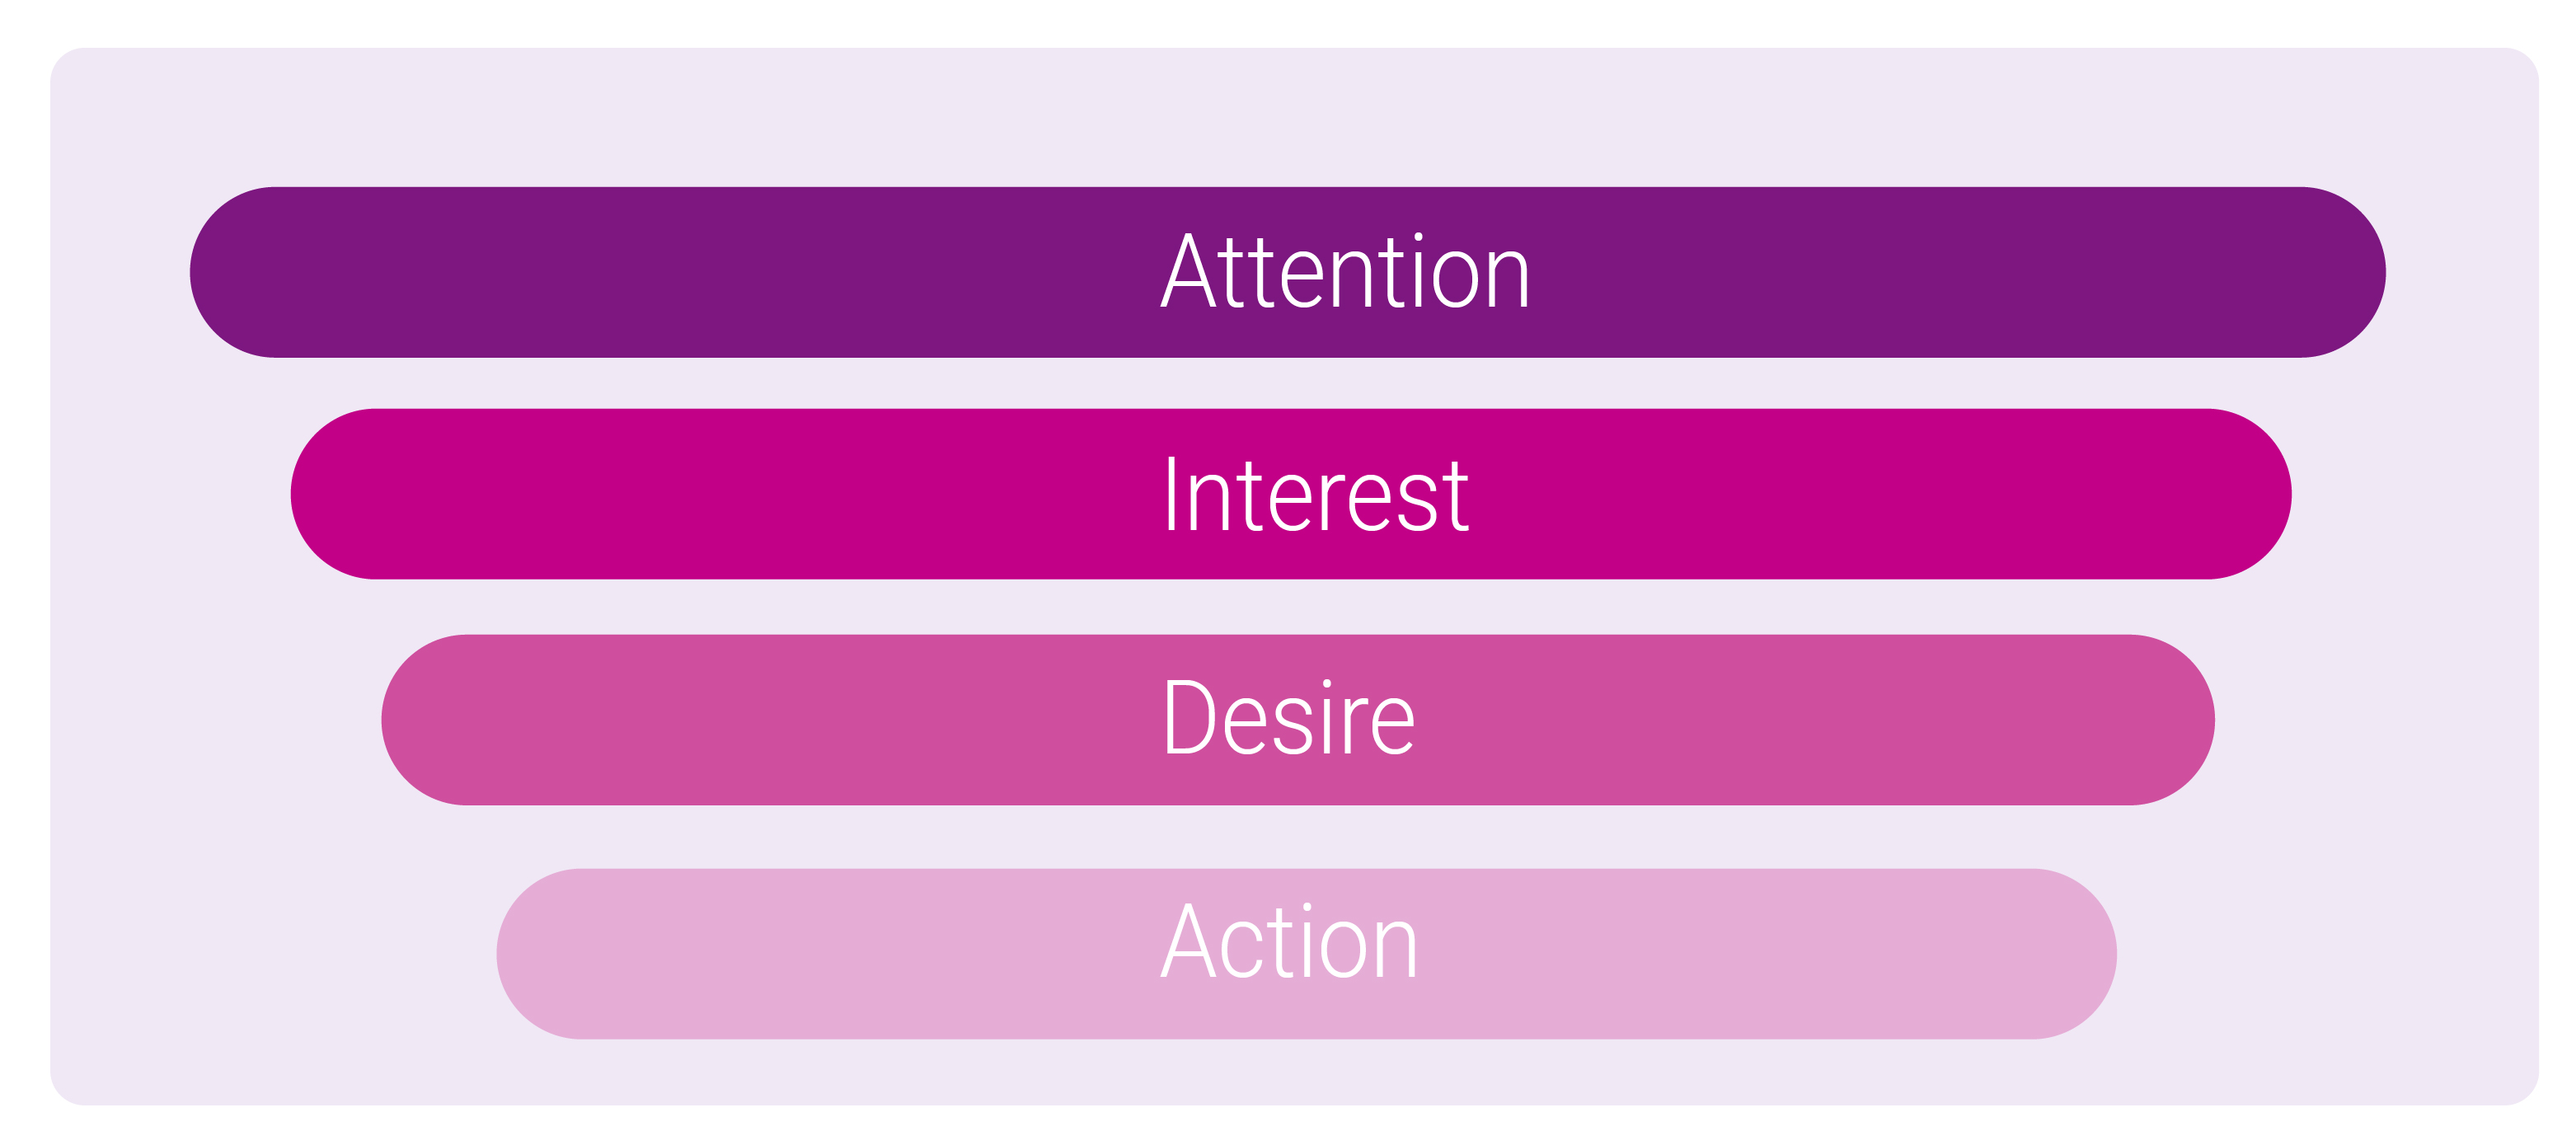 The customer journey is made up of: Attention, interest, desire, and action.